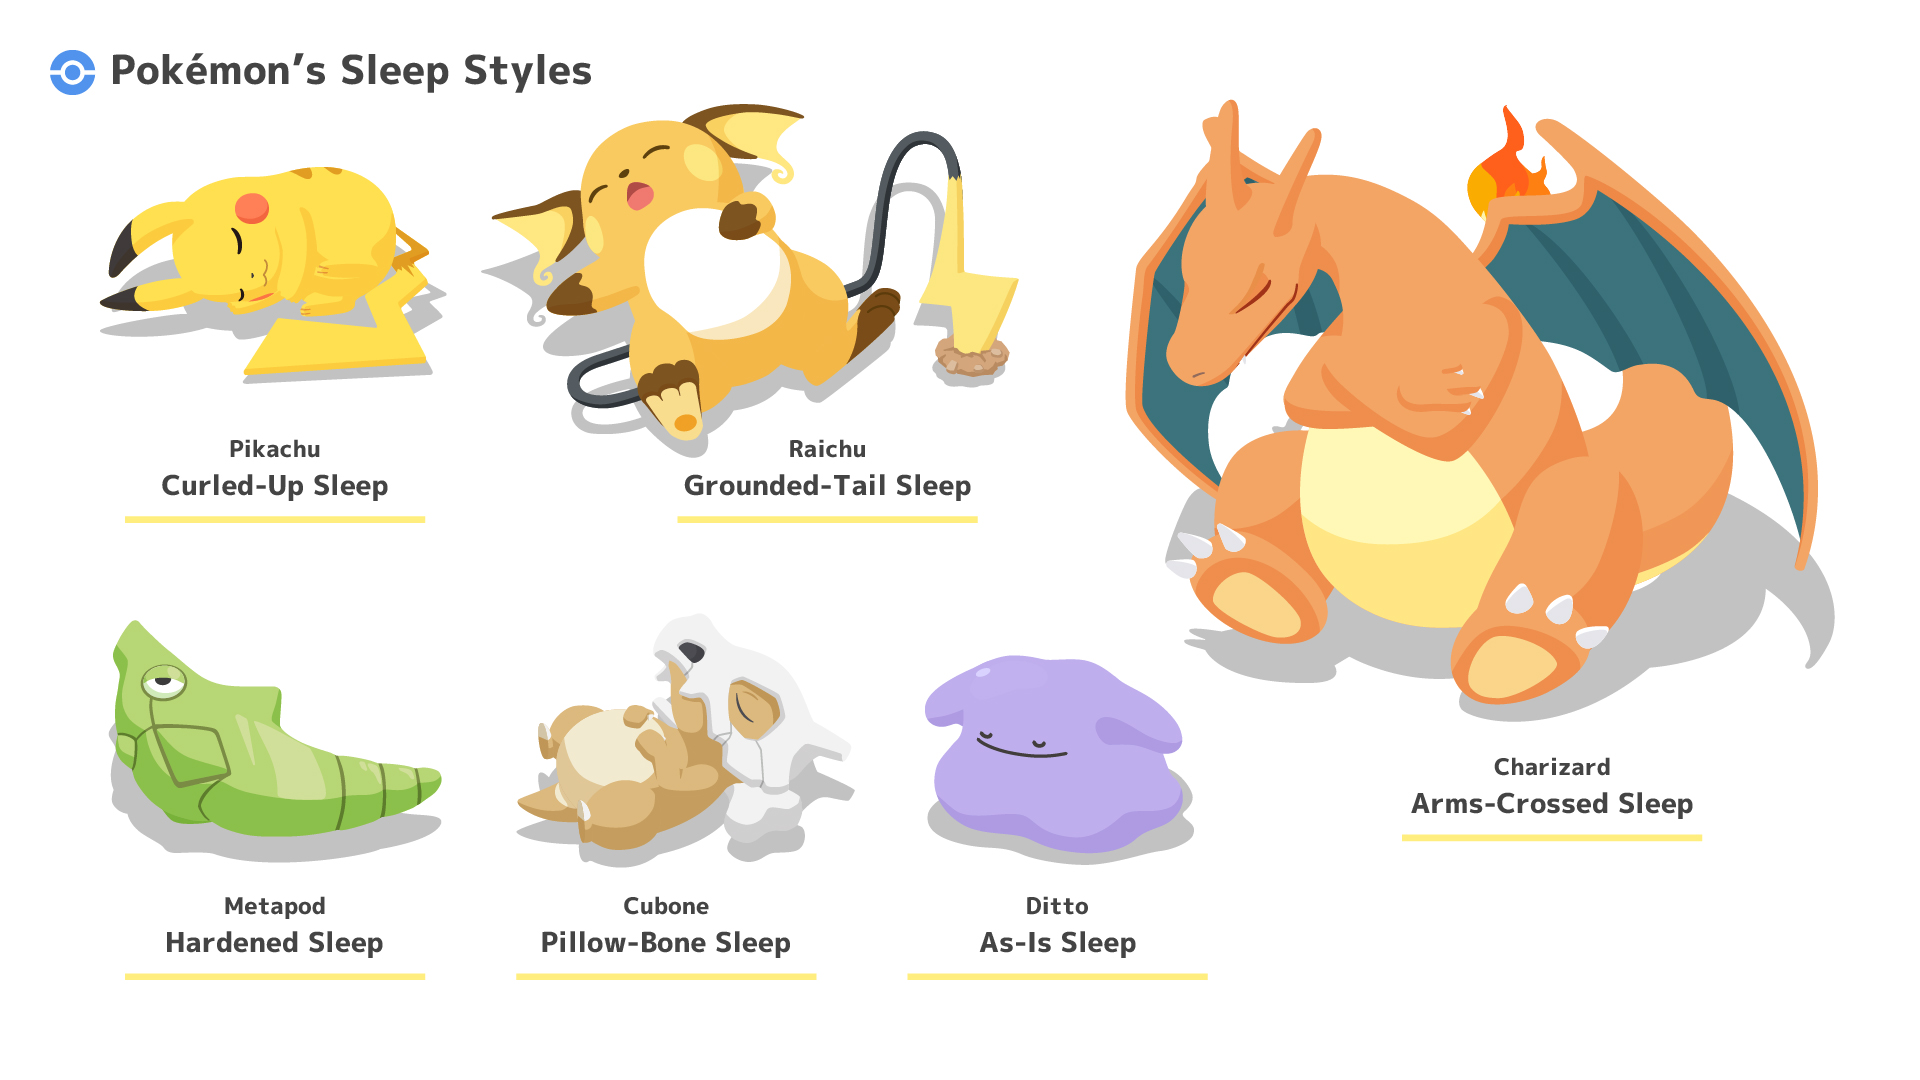 All Natures & Their Effects In Pokemon Sleep